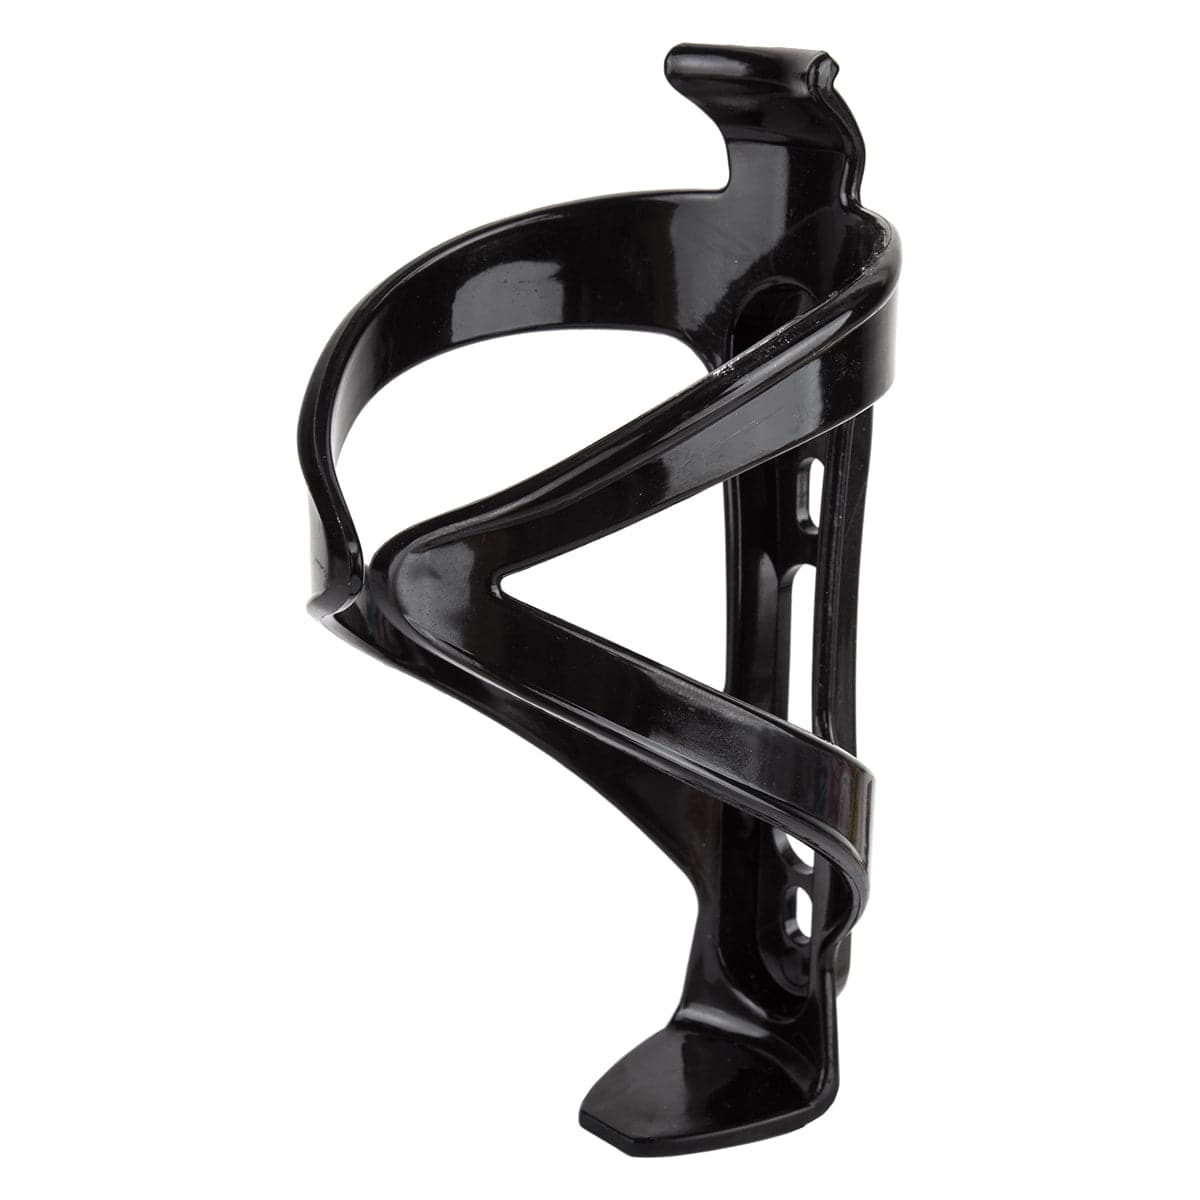 Black water bottle cage left side angle view